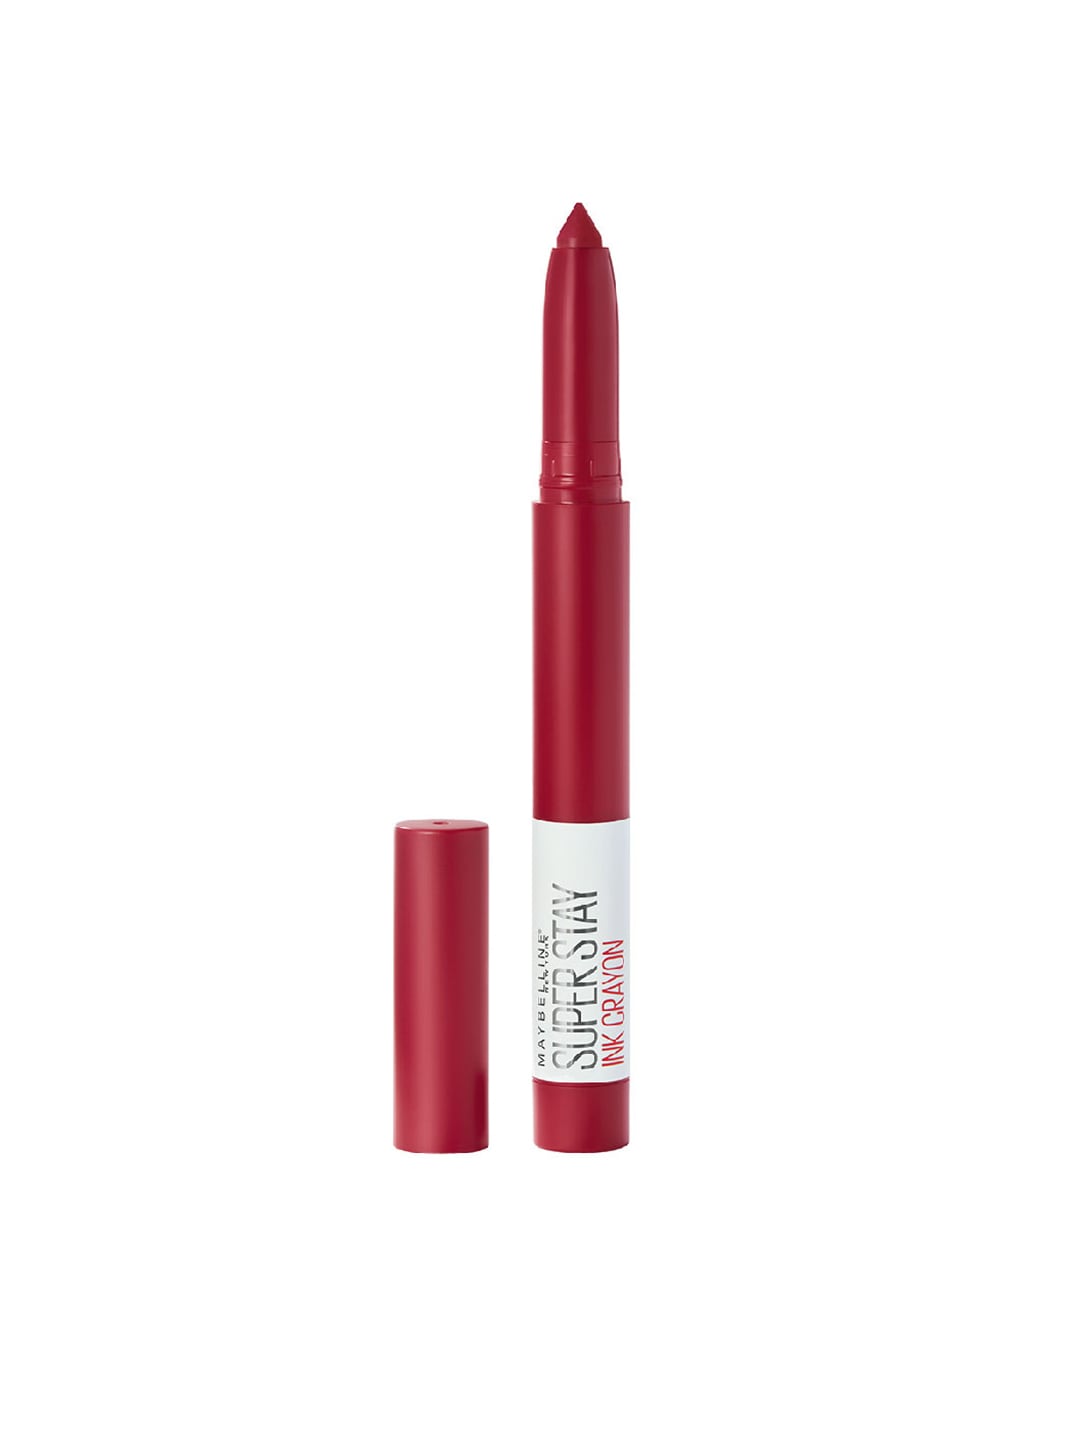 Maybelline New York Superstay Matte Ink Crayon Lipstick- Own Your Empire 50 1.2 g Price in India